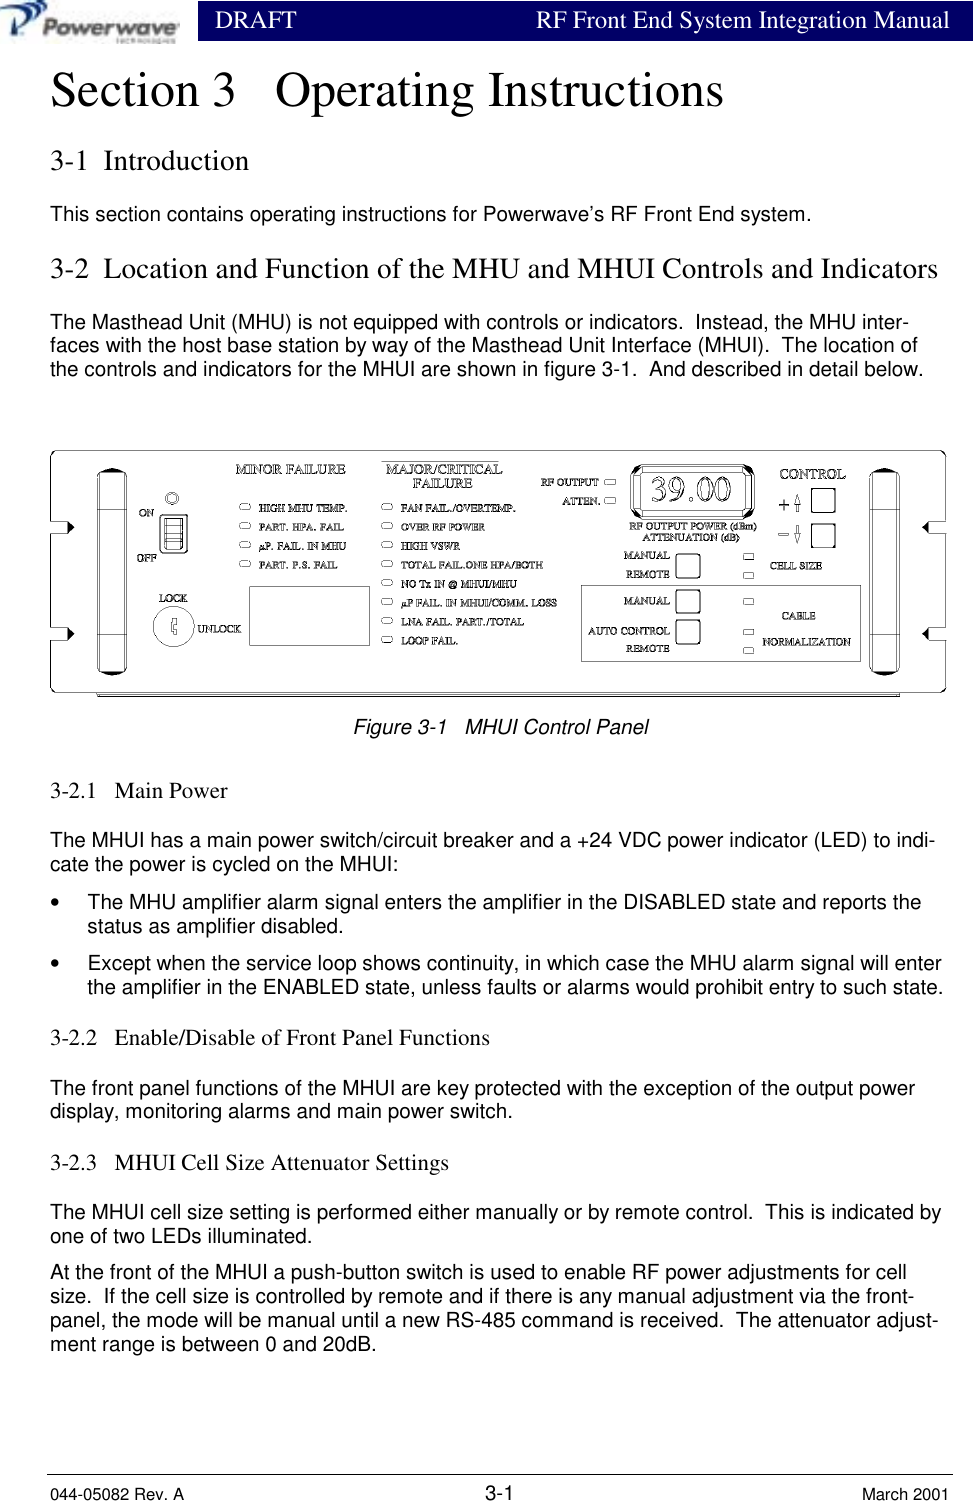                 DRAFT RF Front End System Integration Manual044-05082 Rev. A 3-1 March 2001Section 3   Operating Instructions3-1  IntroductionThis section contains operating instructions for Powerwave’s RF Front End system.3-2  Location and Function of the MHU and MHUI Controls and IndicatorsThe Masthead Unit (MHU) is not equipped with controls or indicators.  Instead, the MHU inter-faces with the host base station by way of the Masthead Unit Interface (MHUI).  The location ofthe controls and indicators for the MHUI are shown in figure 3-1.  And described in detail below.Figure 3-1   MHUI Control Panel3-2.1   Main PowerThe MHUI has a main power switch/circuit breaker and a +24 VDC power indicator (LED) to indi-cate the power is cycled on the MHUI:•  The MHU amplifier alarm signal enters the amplifier in the DISABLED state and reports thestatus as amplifier disabled.•  Except when the service loop shows continuity, in which case the MHU alarm signal will enterthe amplifier in the ENABLED state, unless faults or alarms would prohibit entry to such state.3-2.2   Enable/Disable of Front Panel FunctionsThe front panel functions of the MHUI are key protected with the exception of the output powerdisplay, monitoring alarms and main power switch.3-2.3   MHUI Cell Size Attenuator SettingsThe MHUI cell size setting is performed either manually or by remote control.  This is indicated byone of two LEDs illuminated.At the front of the MHUI a push-button switch is used to enable RF power adjustments for cellsize.  If the cell size is controlled by remote and if there is any manual adjustment via the front-panel, the mode will be manual until a new RS-485 command is received.  The attenuator adjust-ment range is between 0 and 20dB.